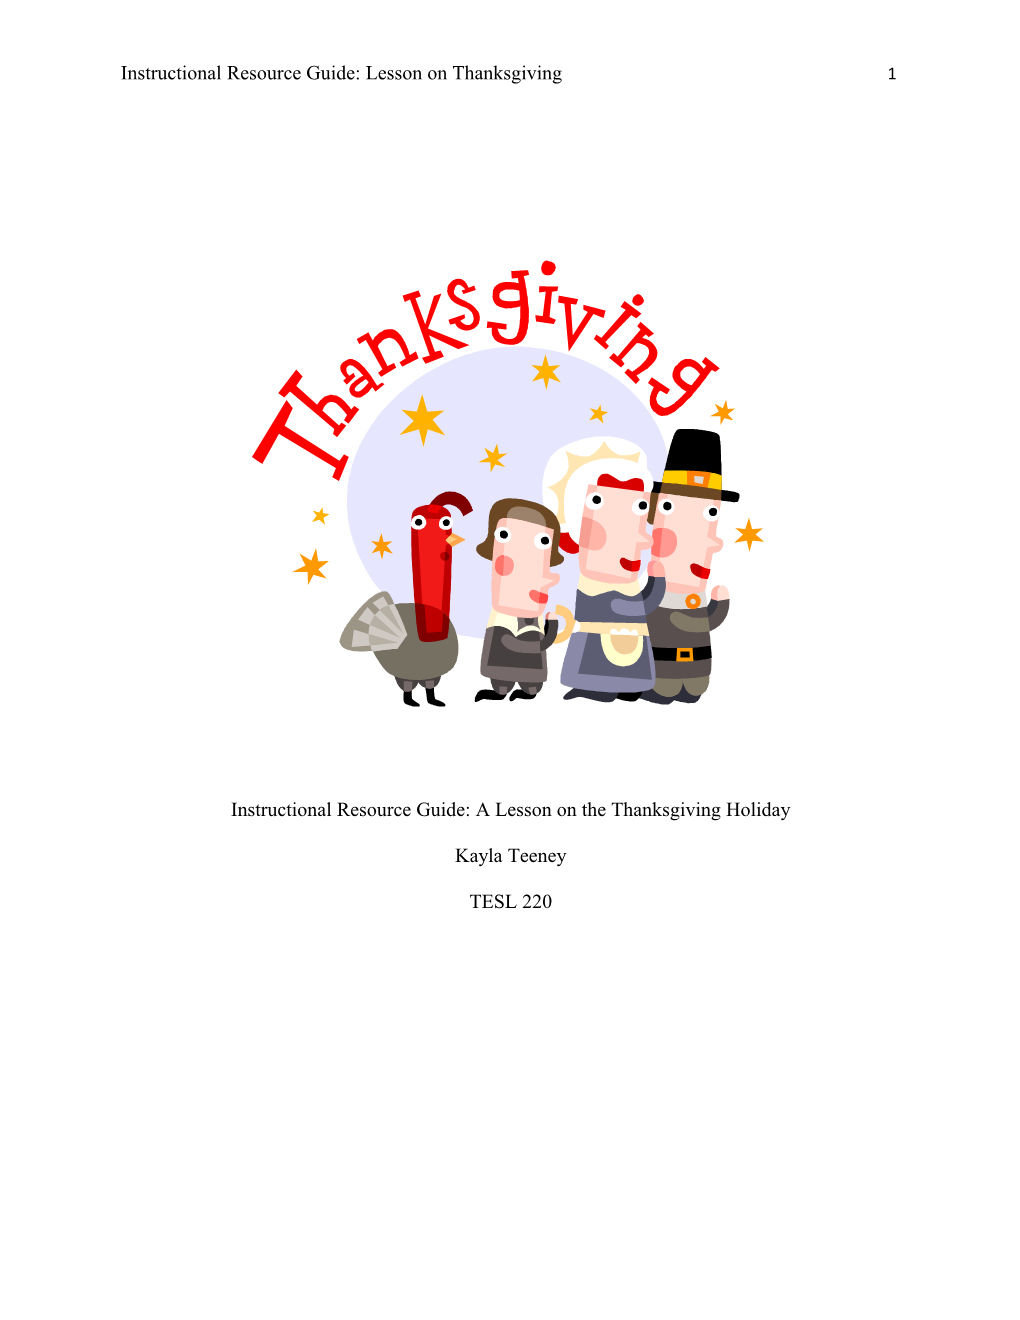 Instructional Resource Guide: a Lesson on the Thanksgiving Holiday